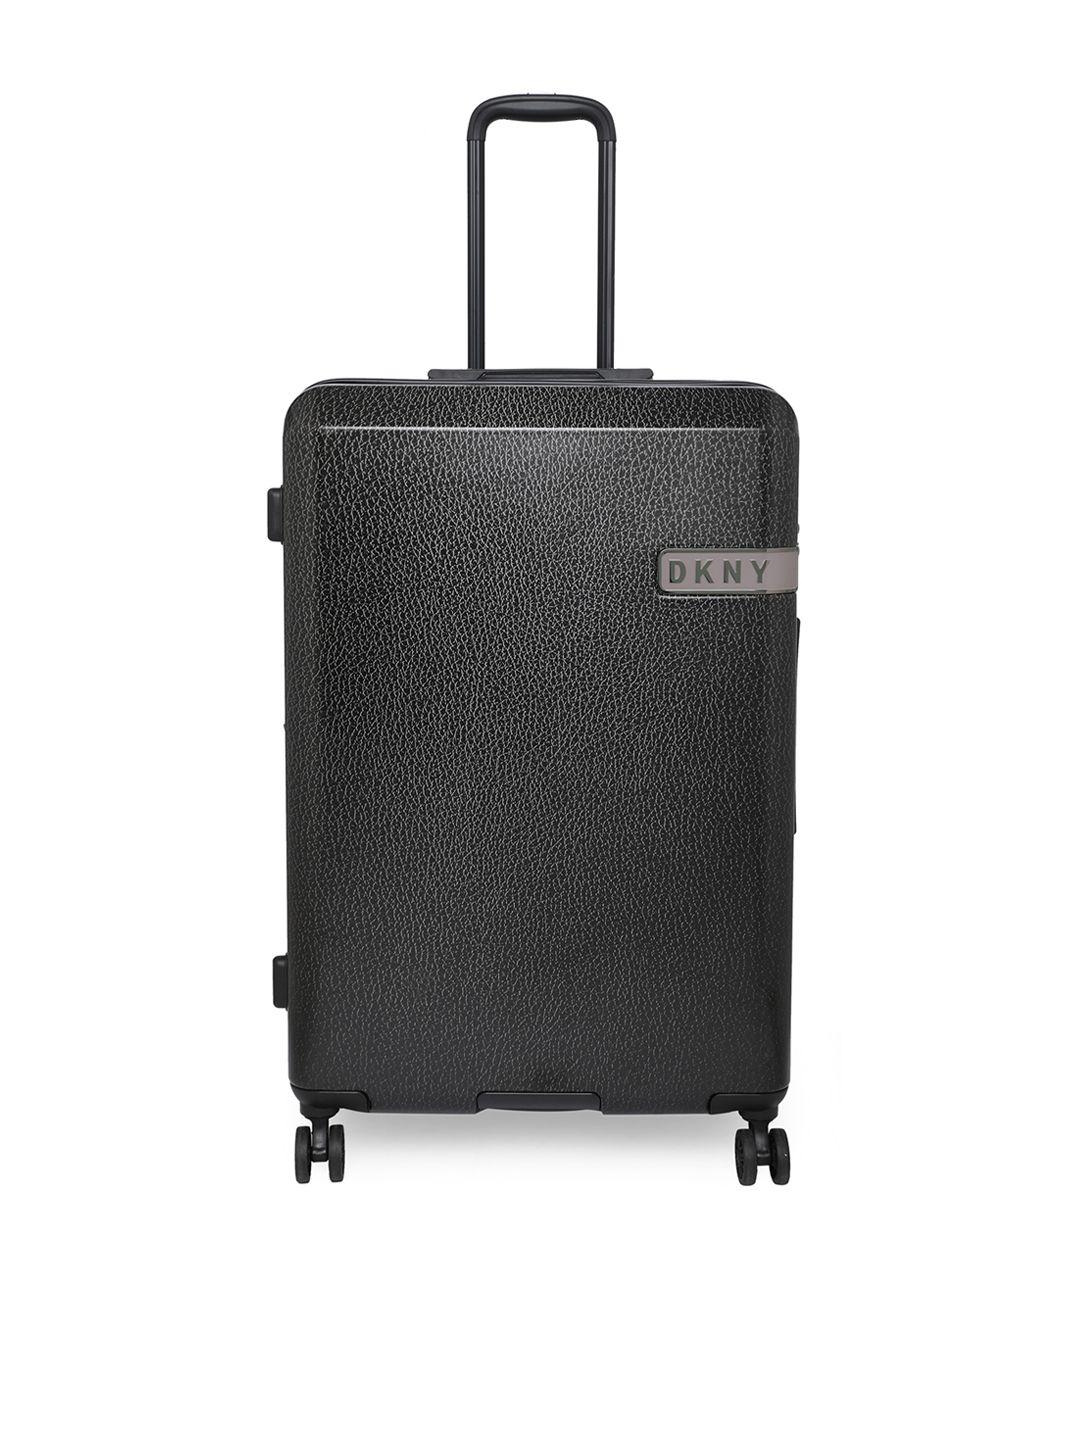 dkny black textured hard case large combination lock suitcase trolley bag